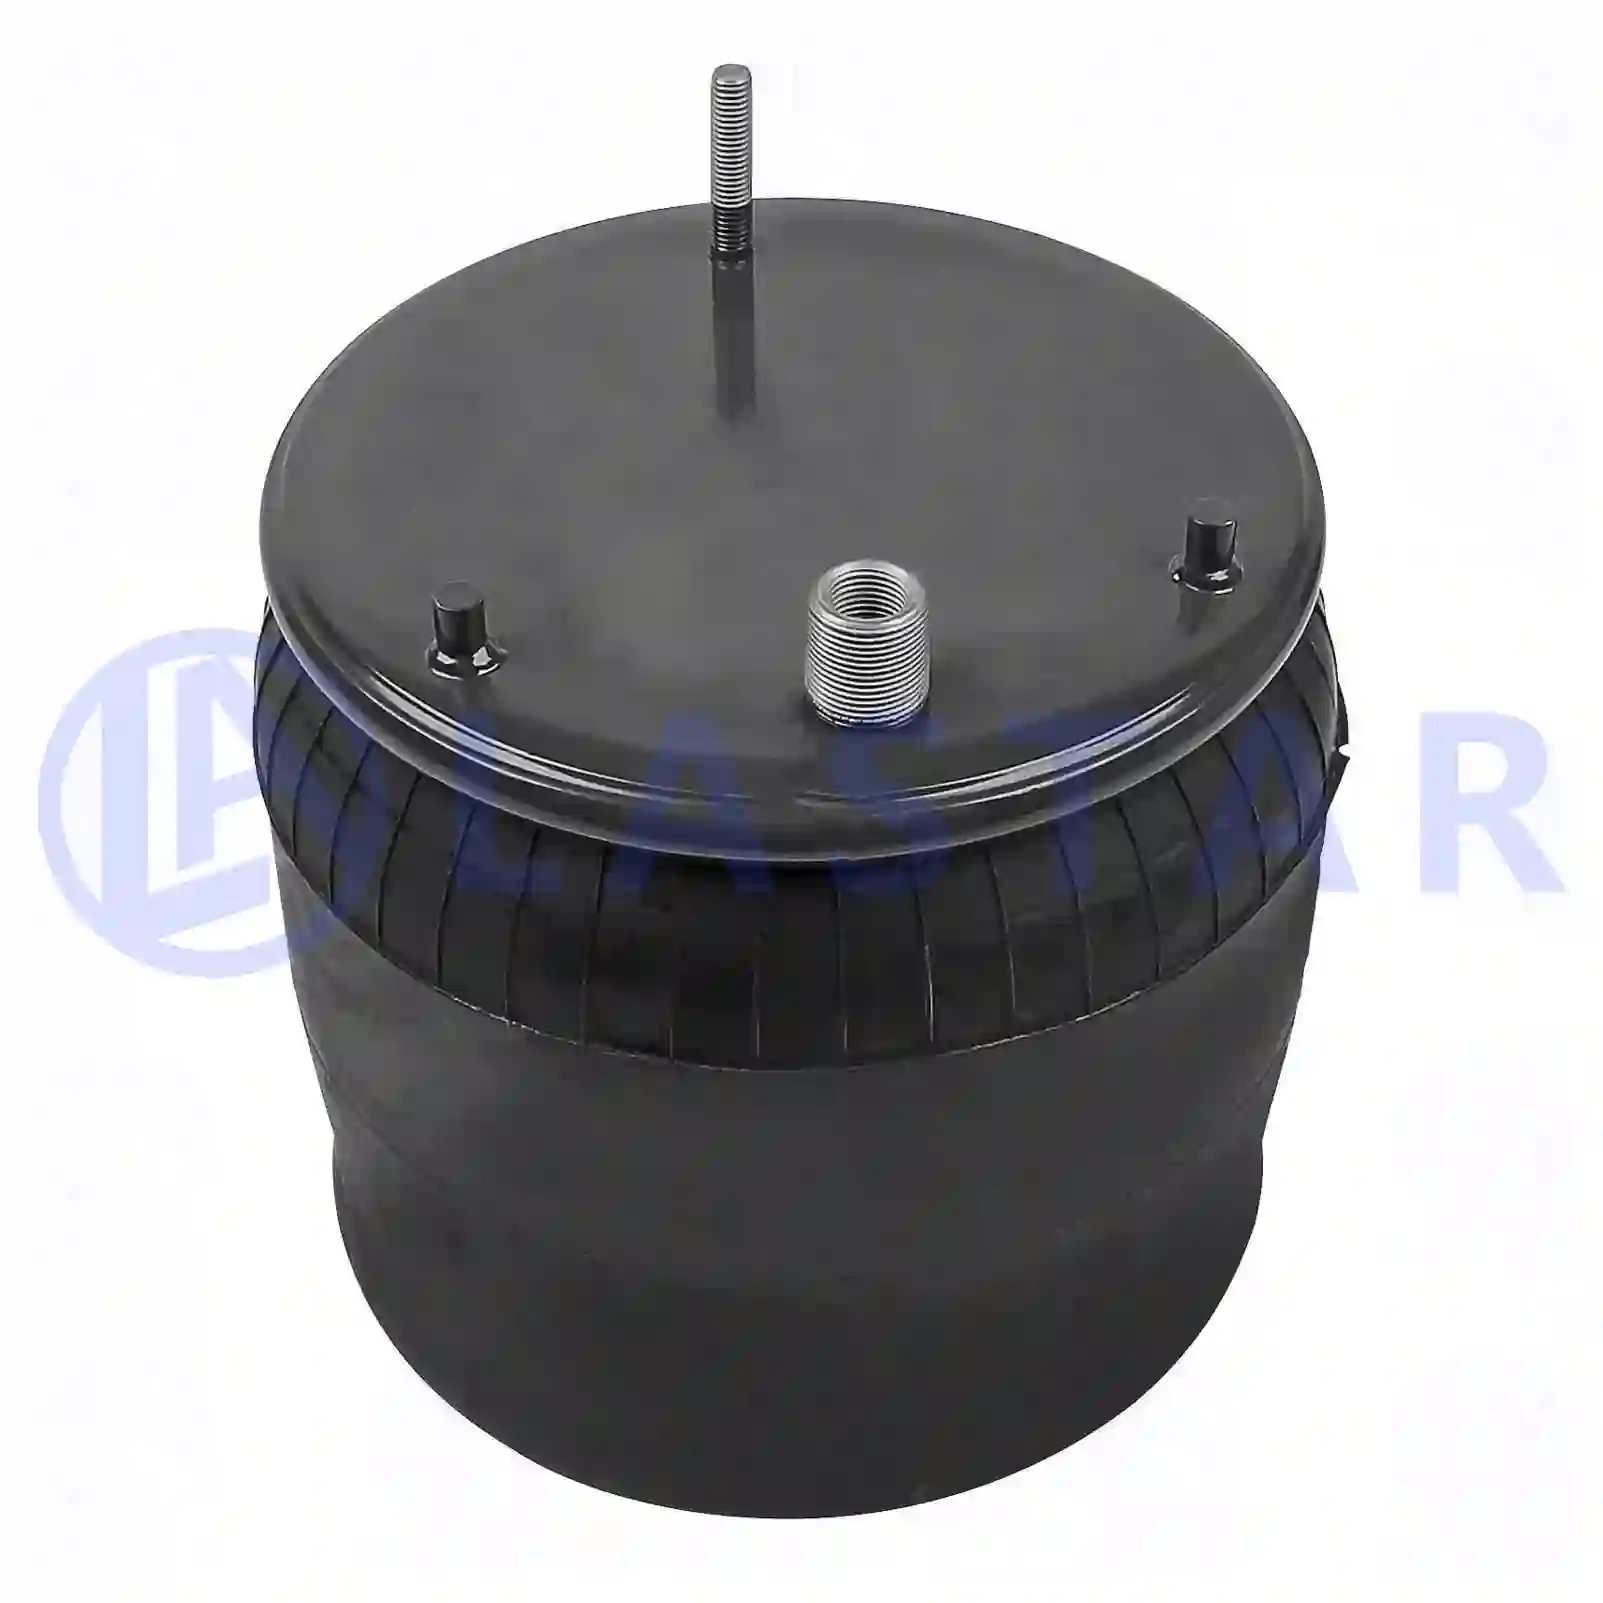 Air spring, with steel piston, 77727166, 21224747, 2205873 ||  77727166 Lastar Spare Part | Truck Spare Parts, Auotomotive Spare Parts Air spring, with steel piston, 77727166, 21224747, 2205873 ||  77727166 Lastar Spare Part | Truck Spare Parts, Auotomotive Spare Parts